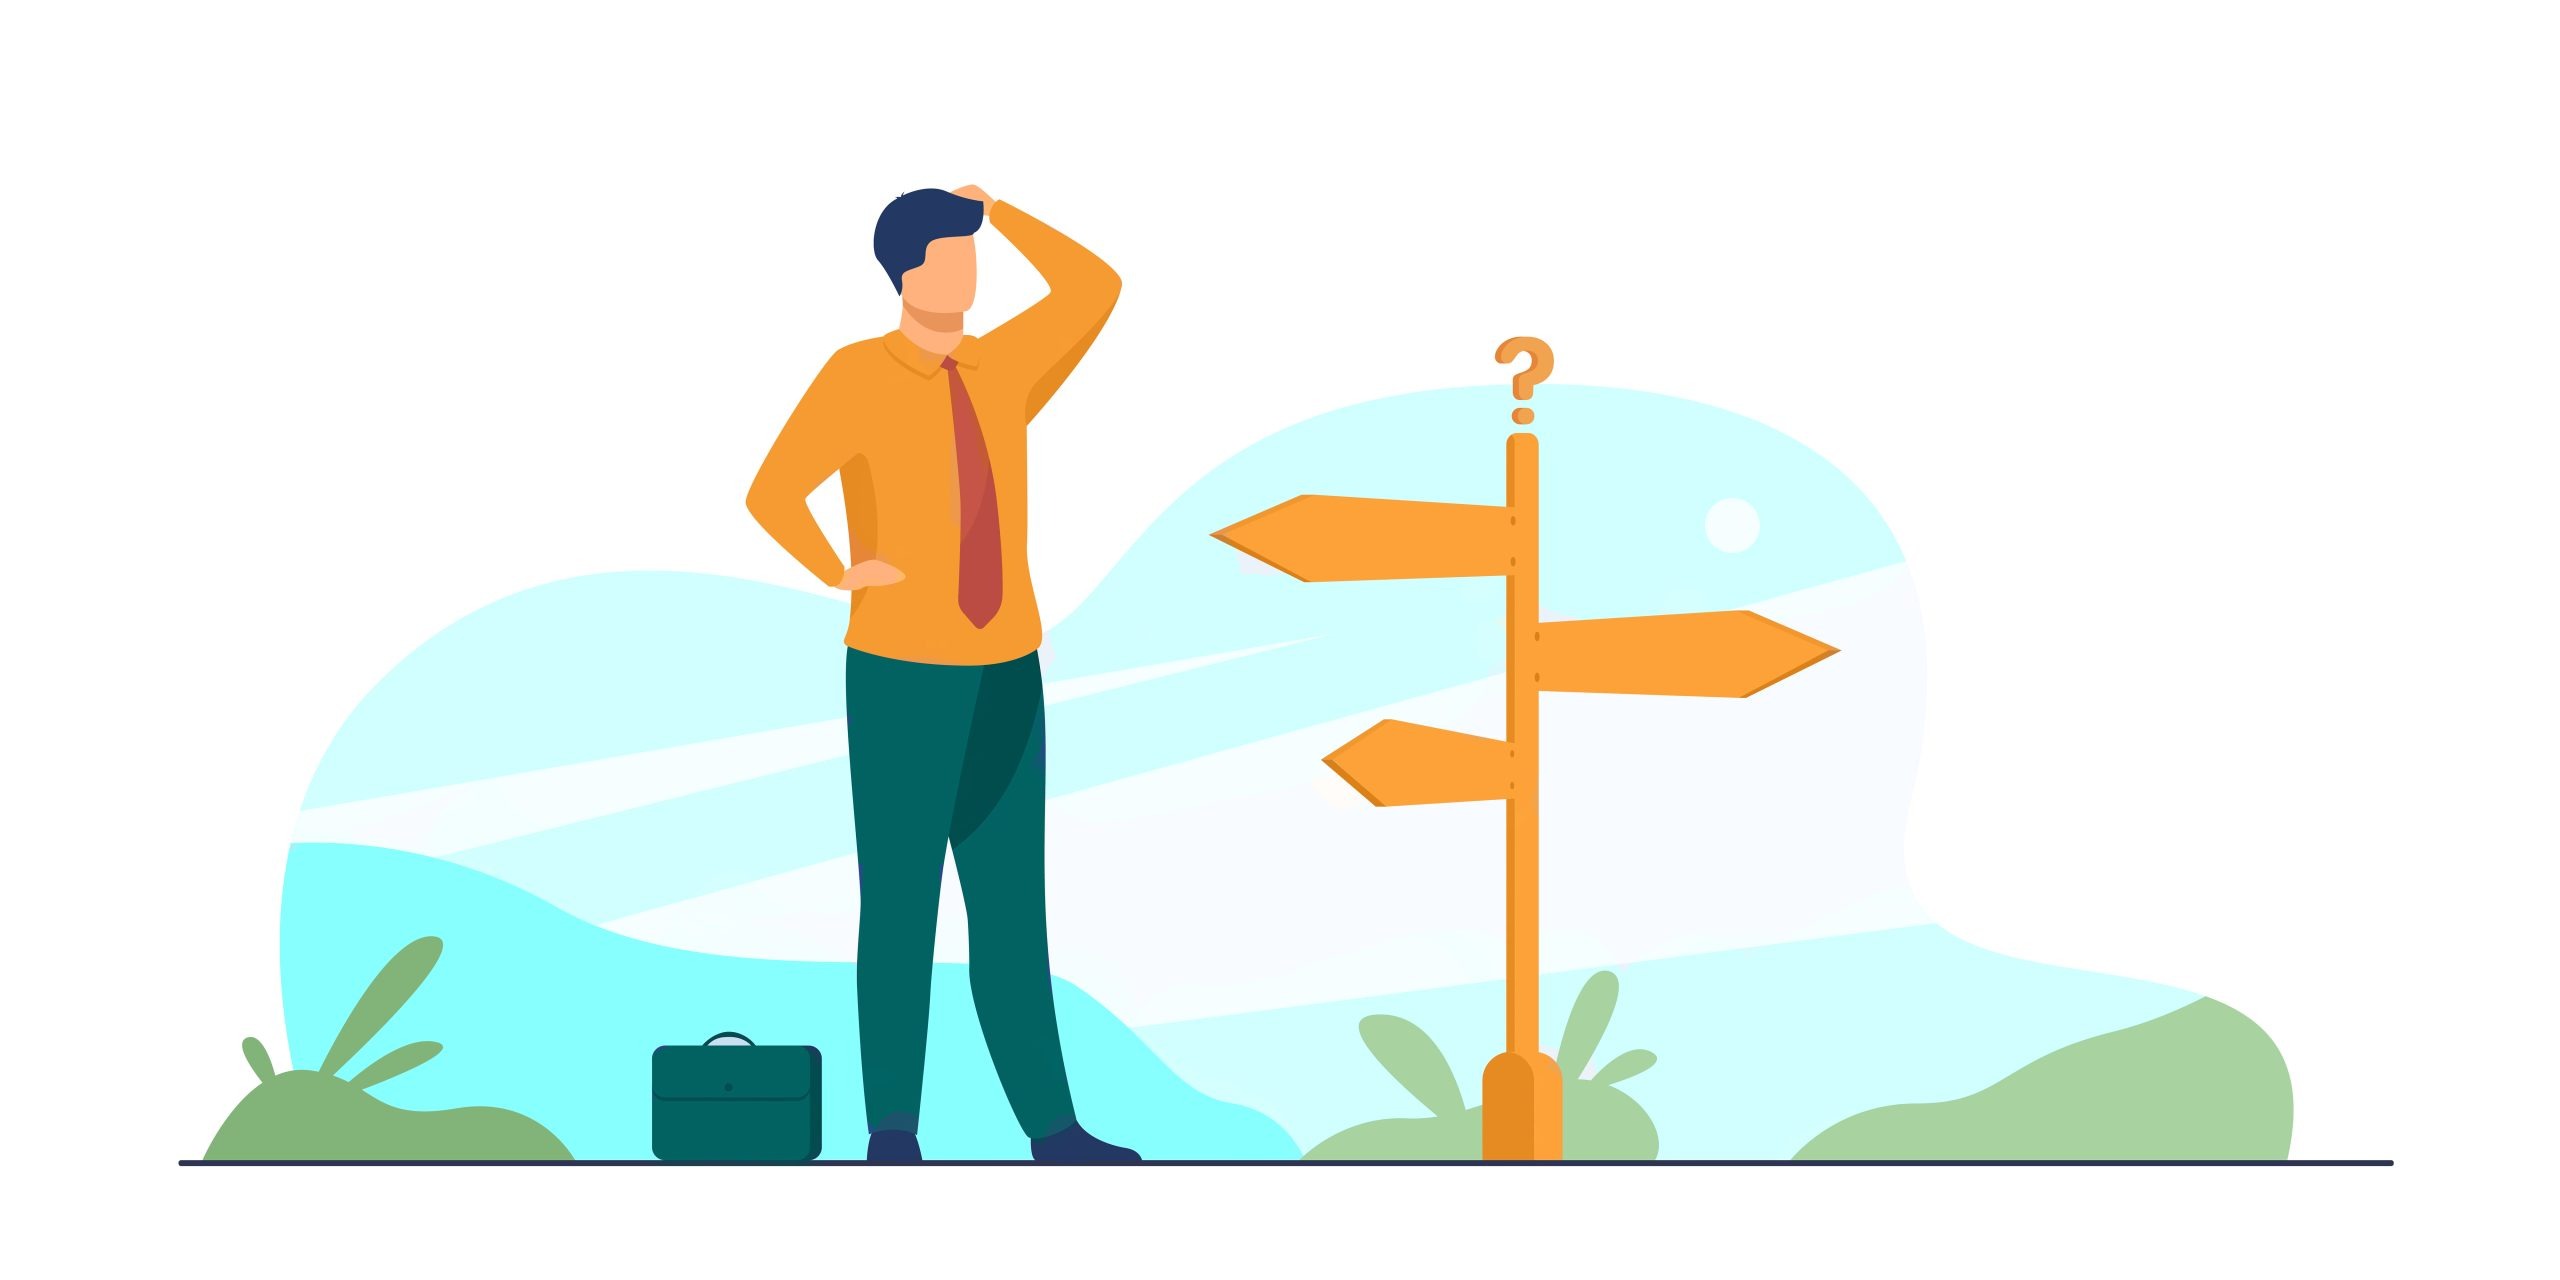 Pensive businessman making decision. Man in office suit standing at road direction signs. Vector illustration for opportunity, solution, idea concept